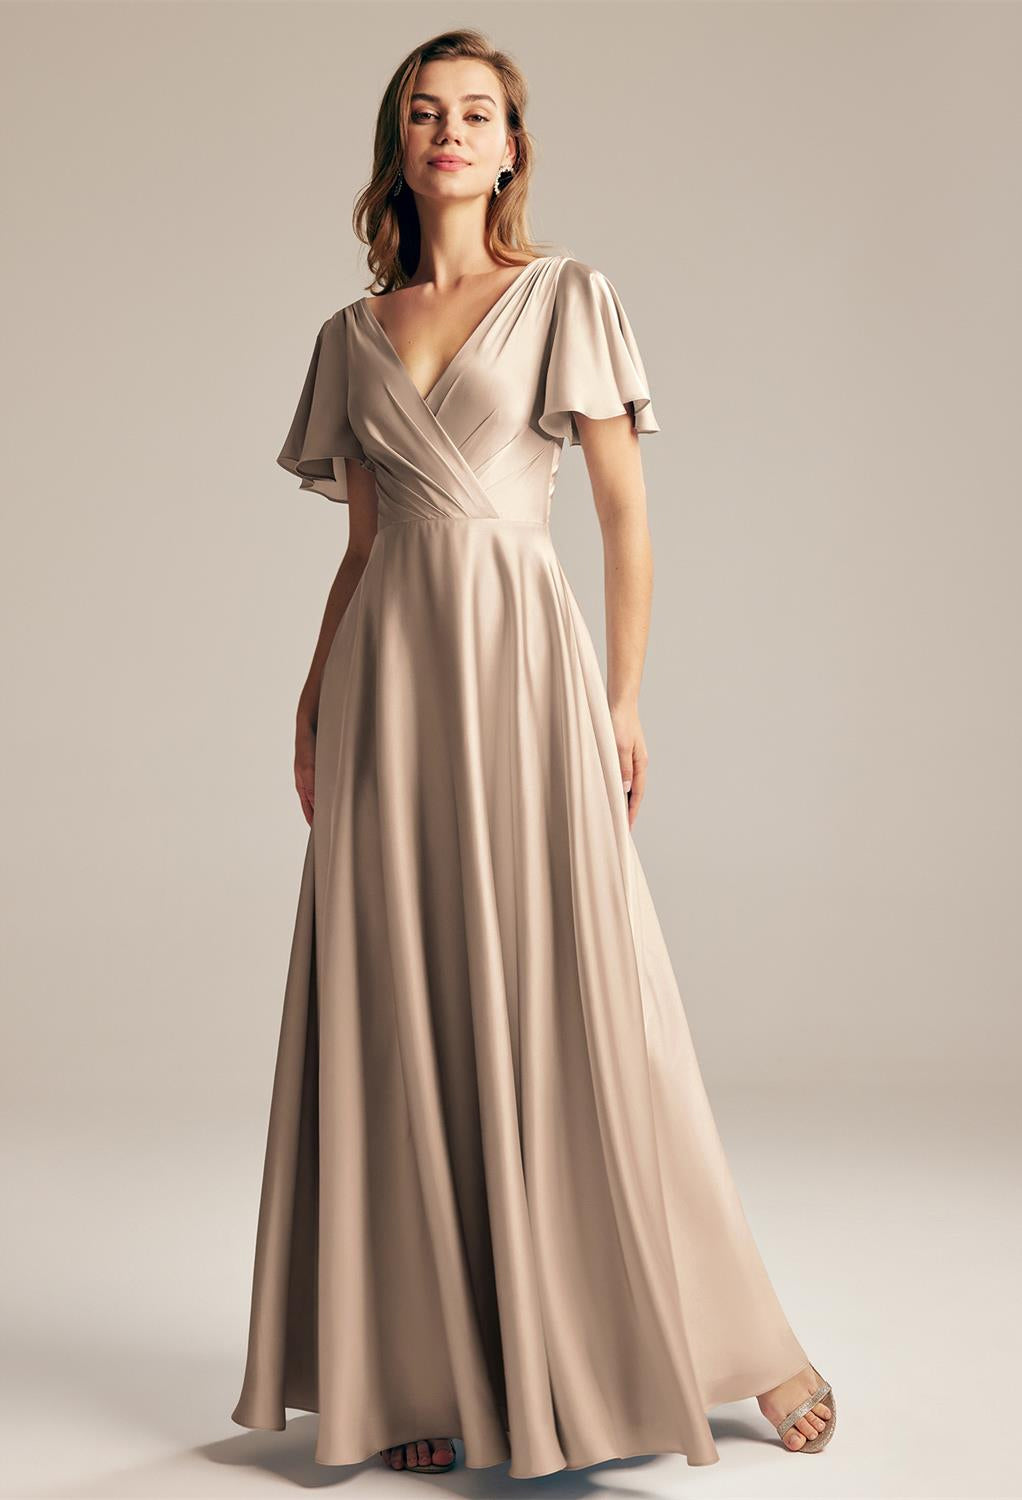 The bridesmaid is wearing a Furst - Satin Charmeuse Bridesmaid Dress - Off The Rack with a v-neck from Bergamot Bridal.